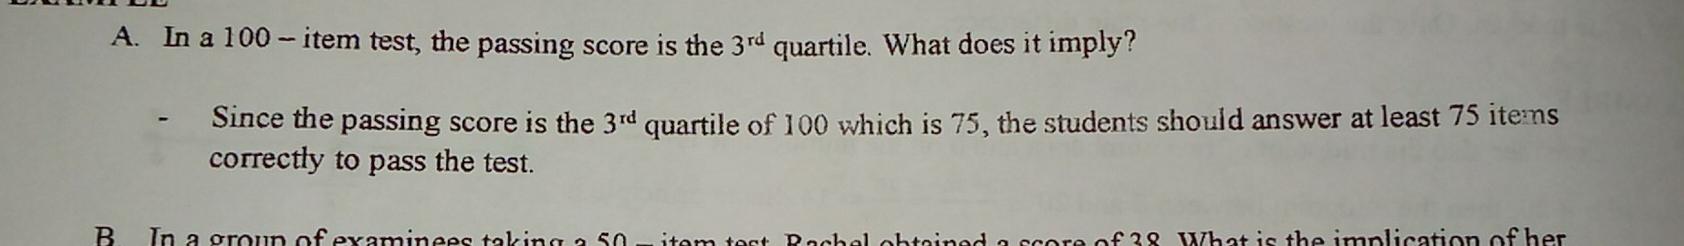 A. In a 100 - item test, the passing score is the 3rd quartile. What does it imply? Since the passing score is the 3rd quartile of 100 which is 75, the students should answer at least 75 items correctly to pass the test. B In a aroun ofexaminees takina a s0 i of 28 What is the imnlication of her